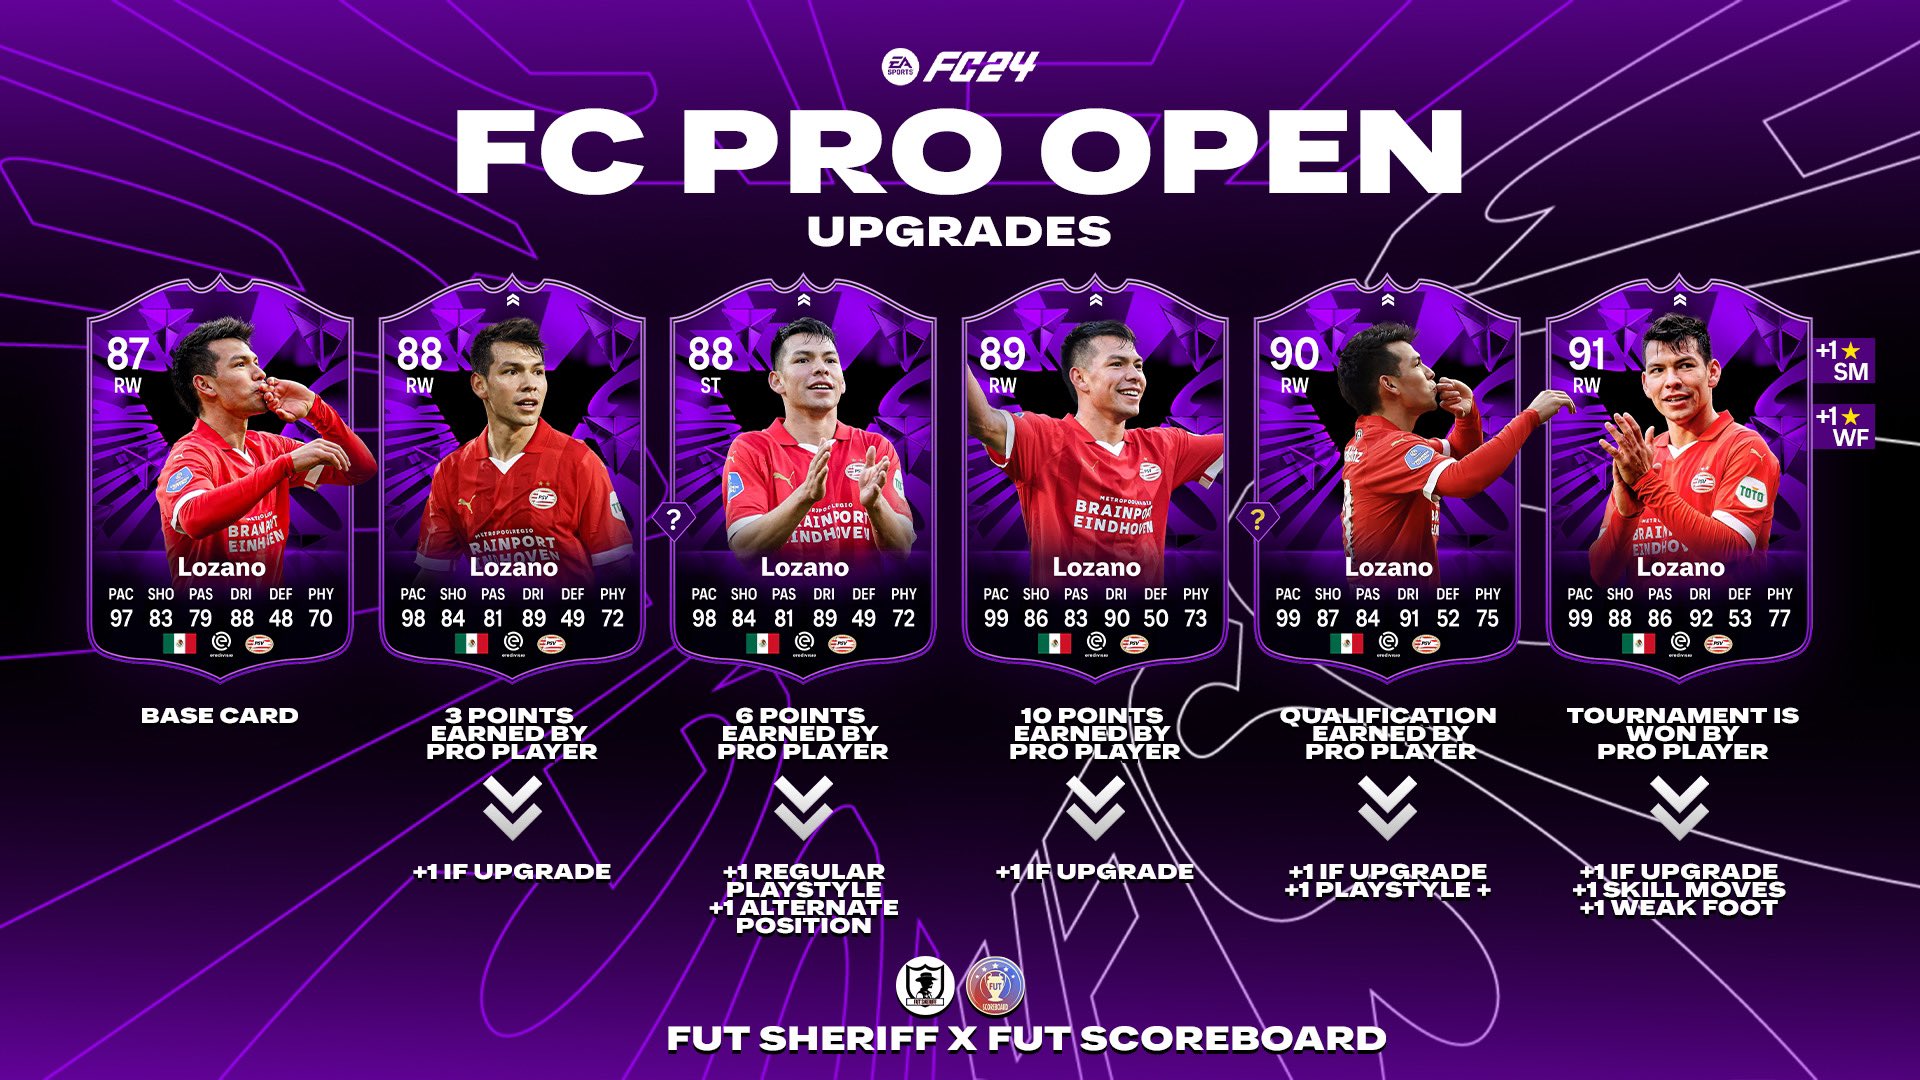 Fut Sheriff on X: 🚨Locatelli🇮🇹 is coming as FC PRO LIVE SBC soon!🔥  Stats are prediction 👀 Make sure to follow @FutSheriff and @LeanDesign_ !  #fc24  / X